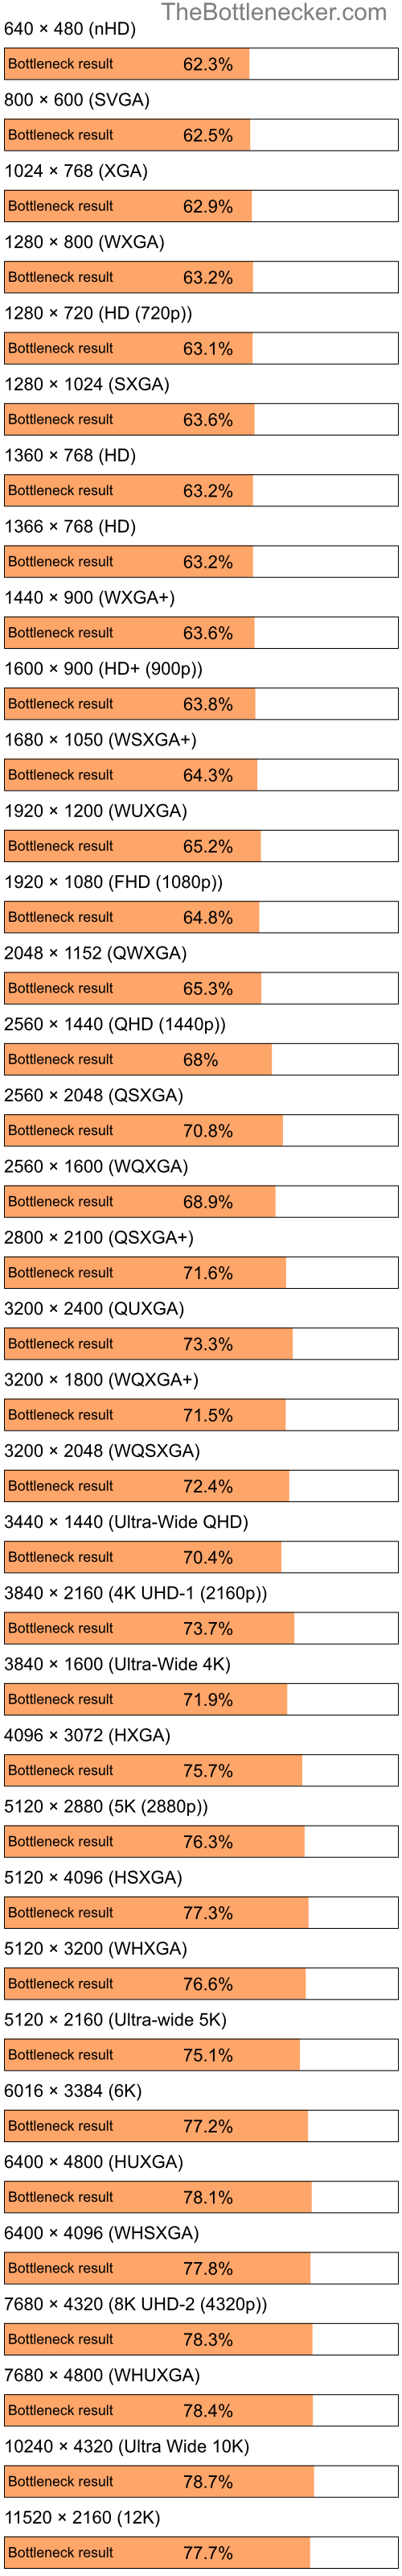 Bottleneck results by resolution for Intel Atom N270 and NVIDIA GeForce 6800 in7 Days to Die